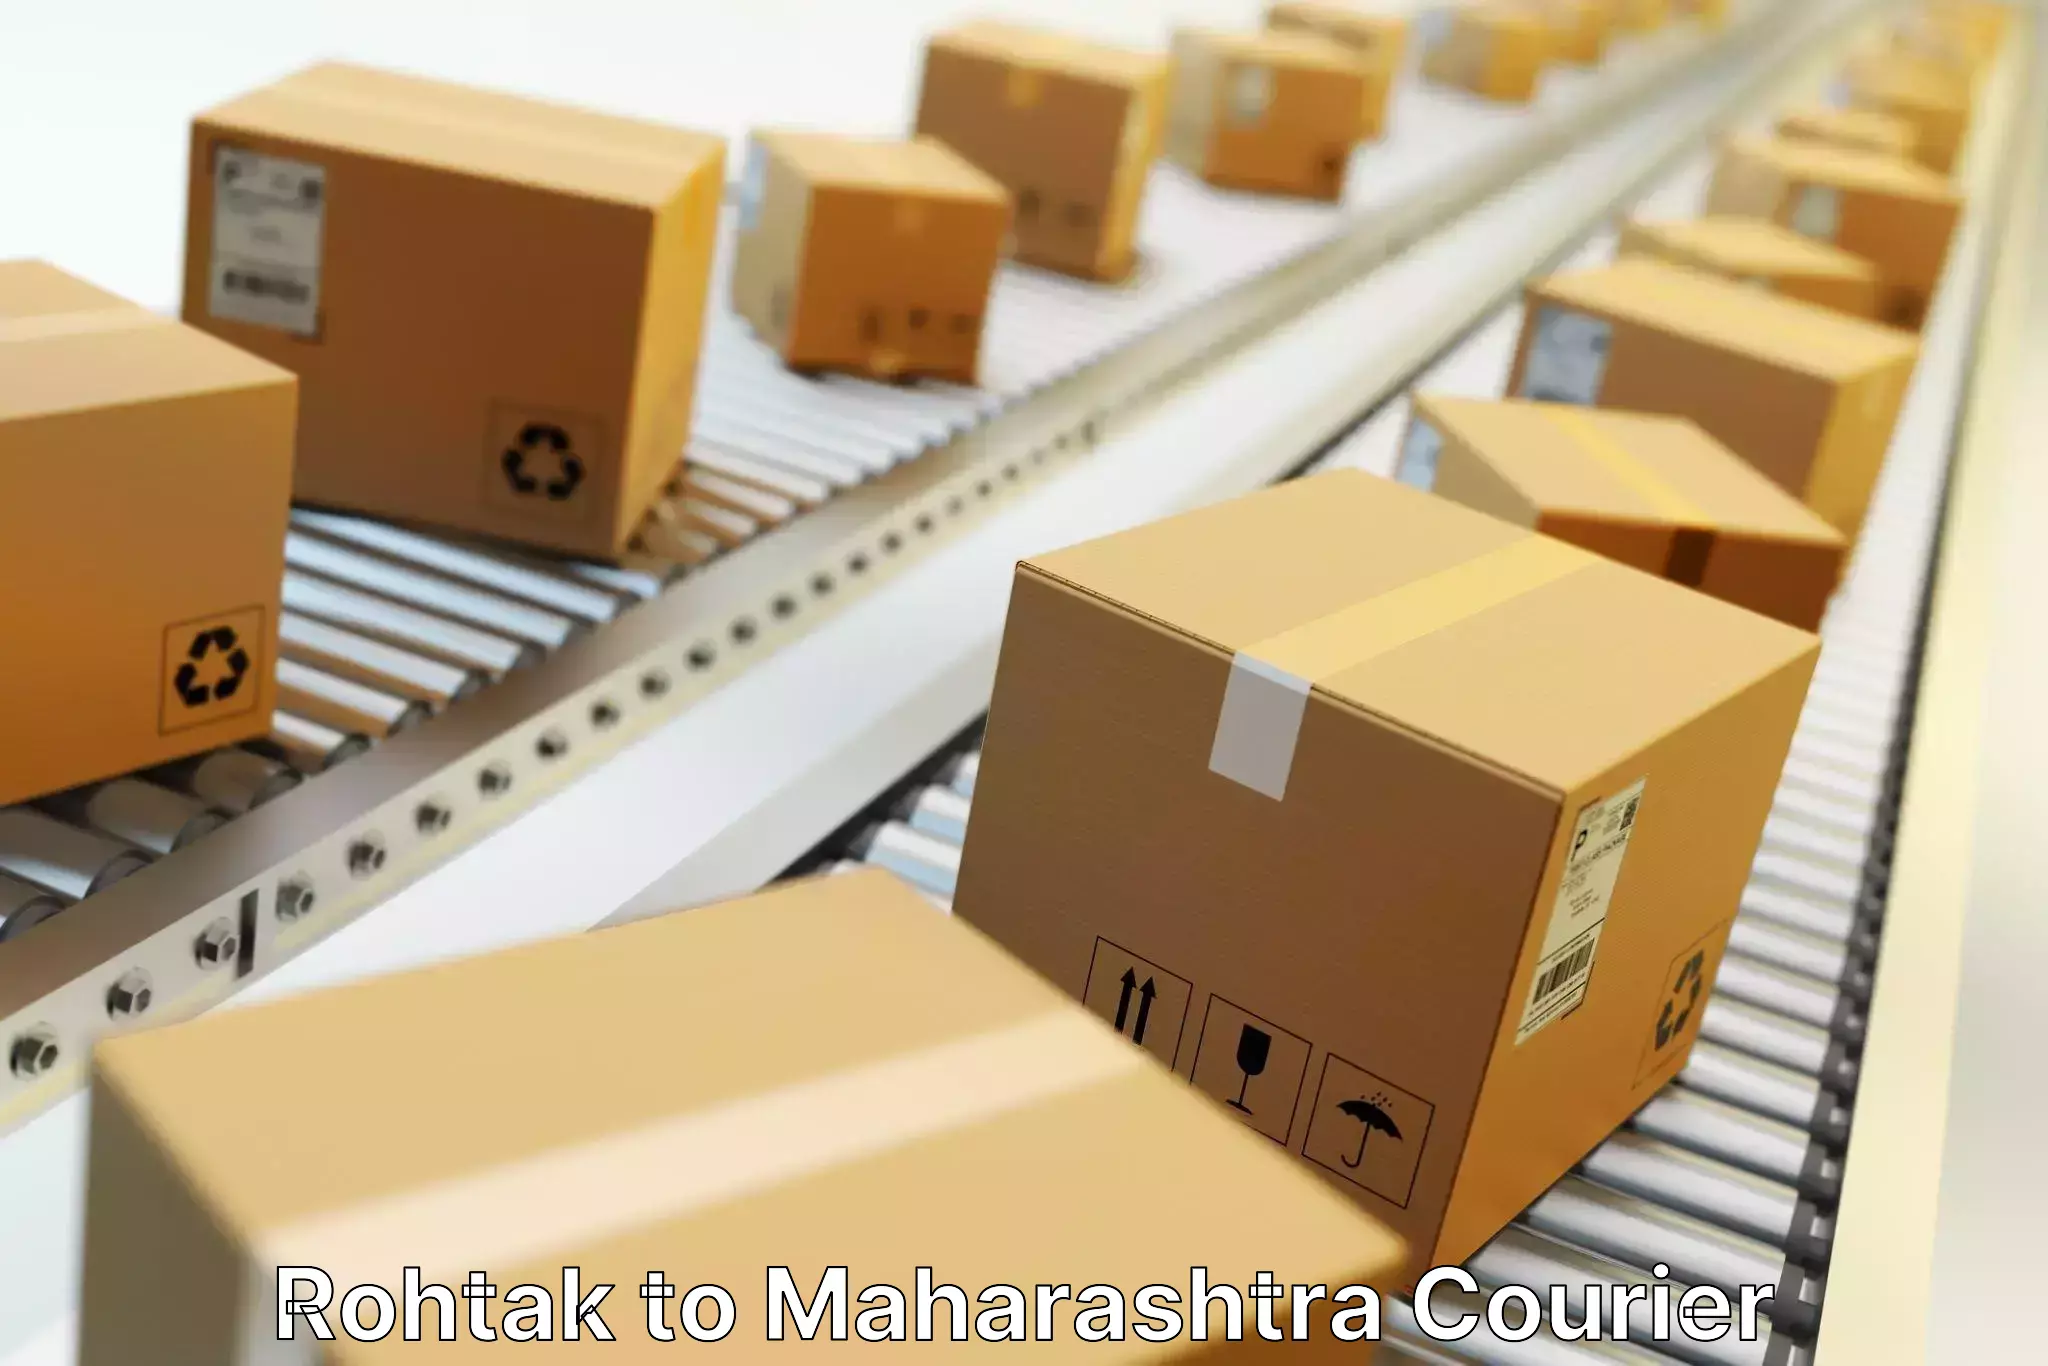 Global courier networks Rohtak to Bhusawal